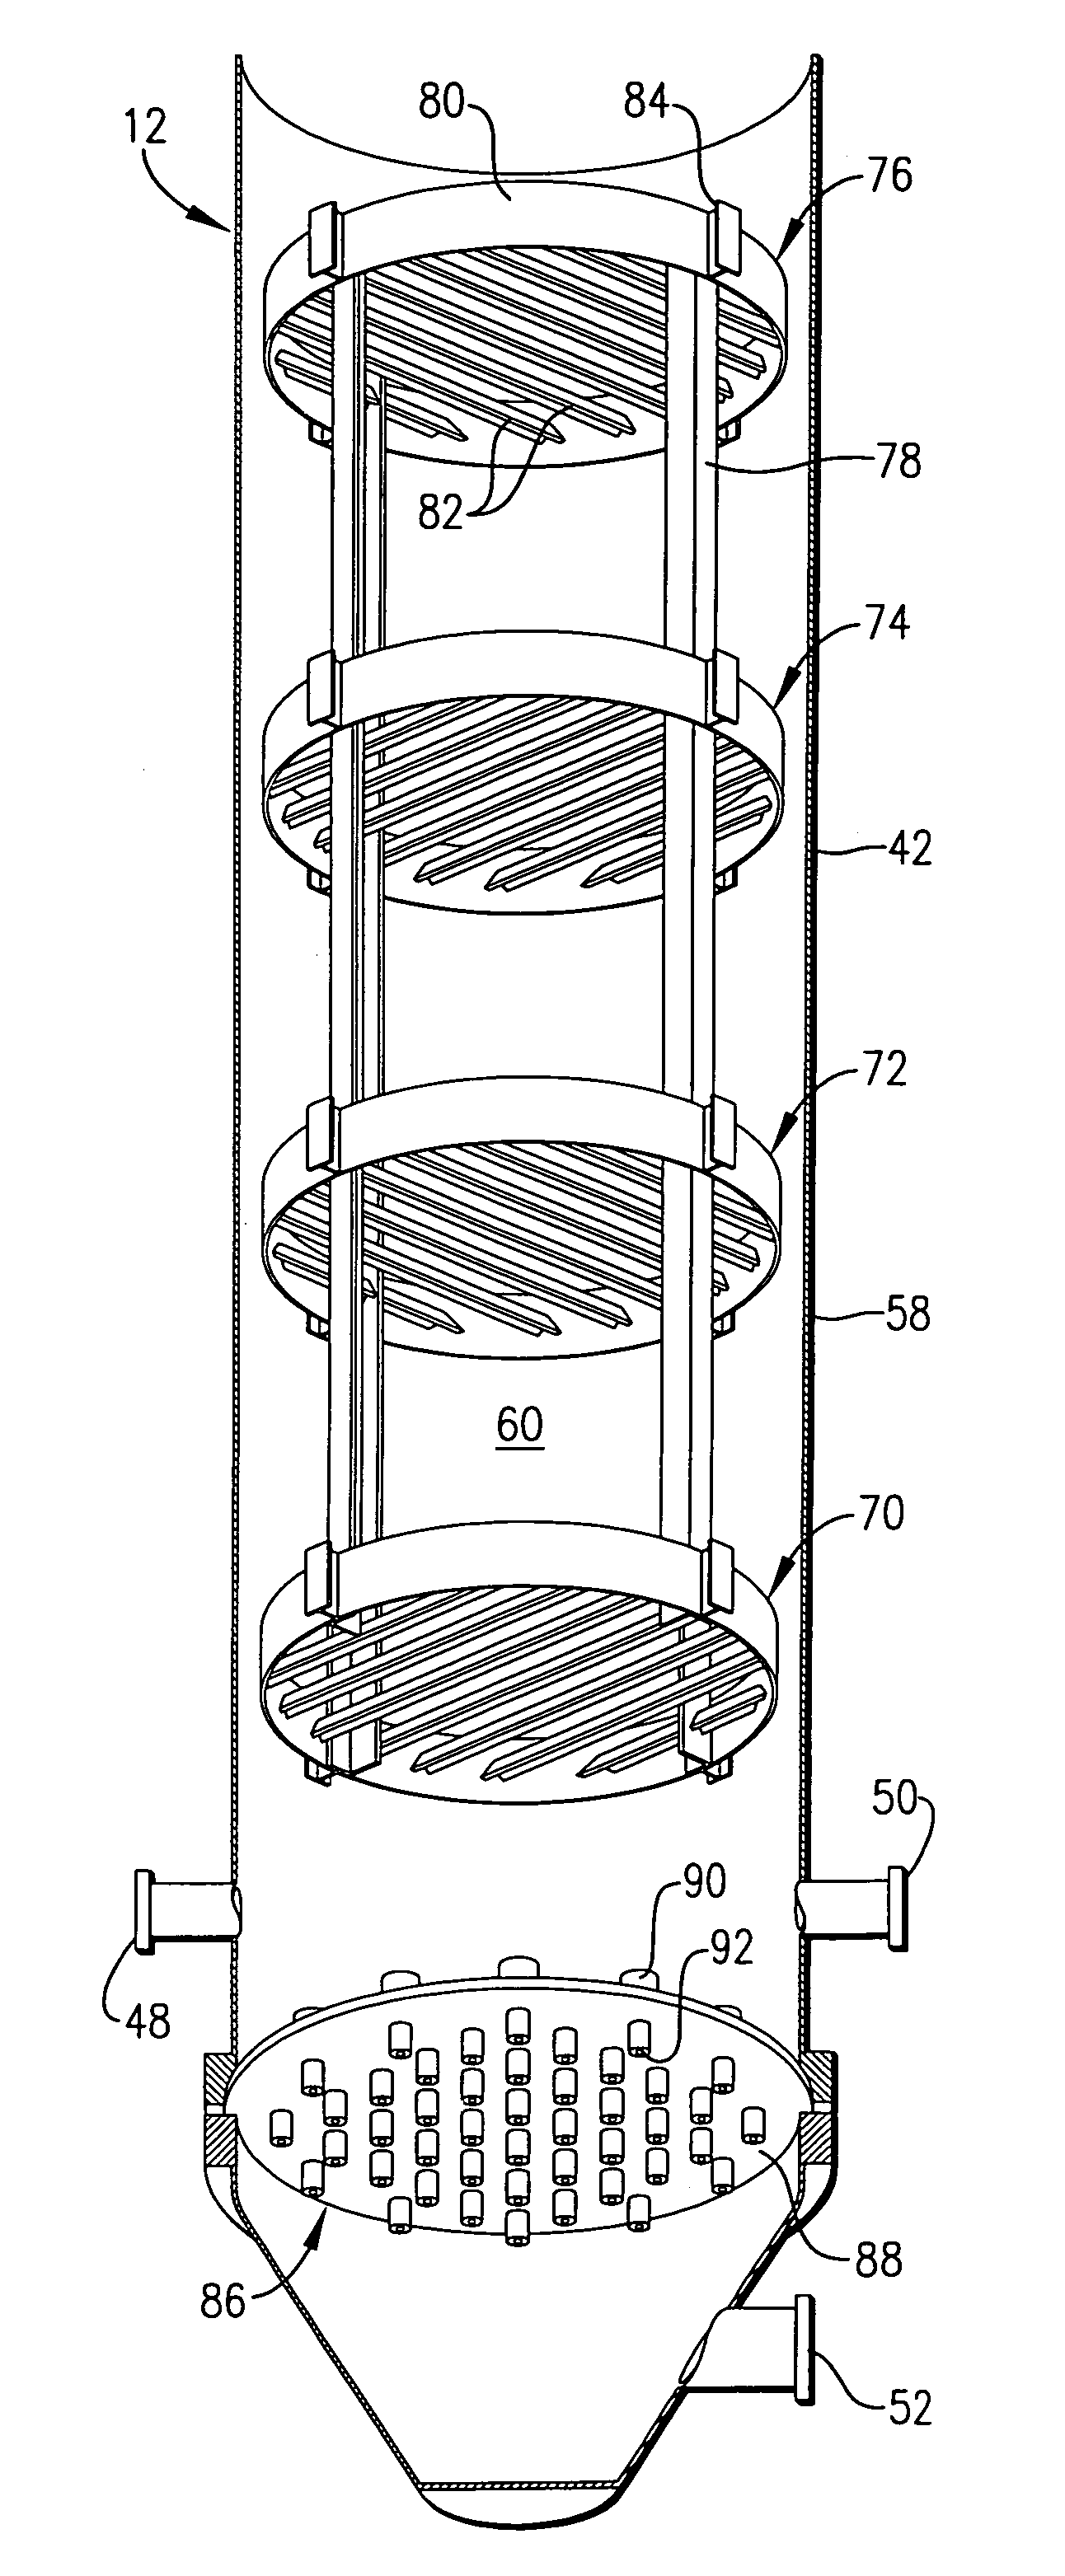 Desulfurization in turbulent fluid bed reactor